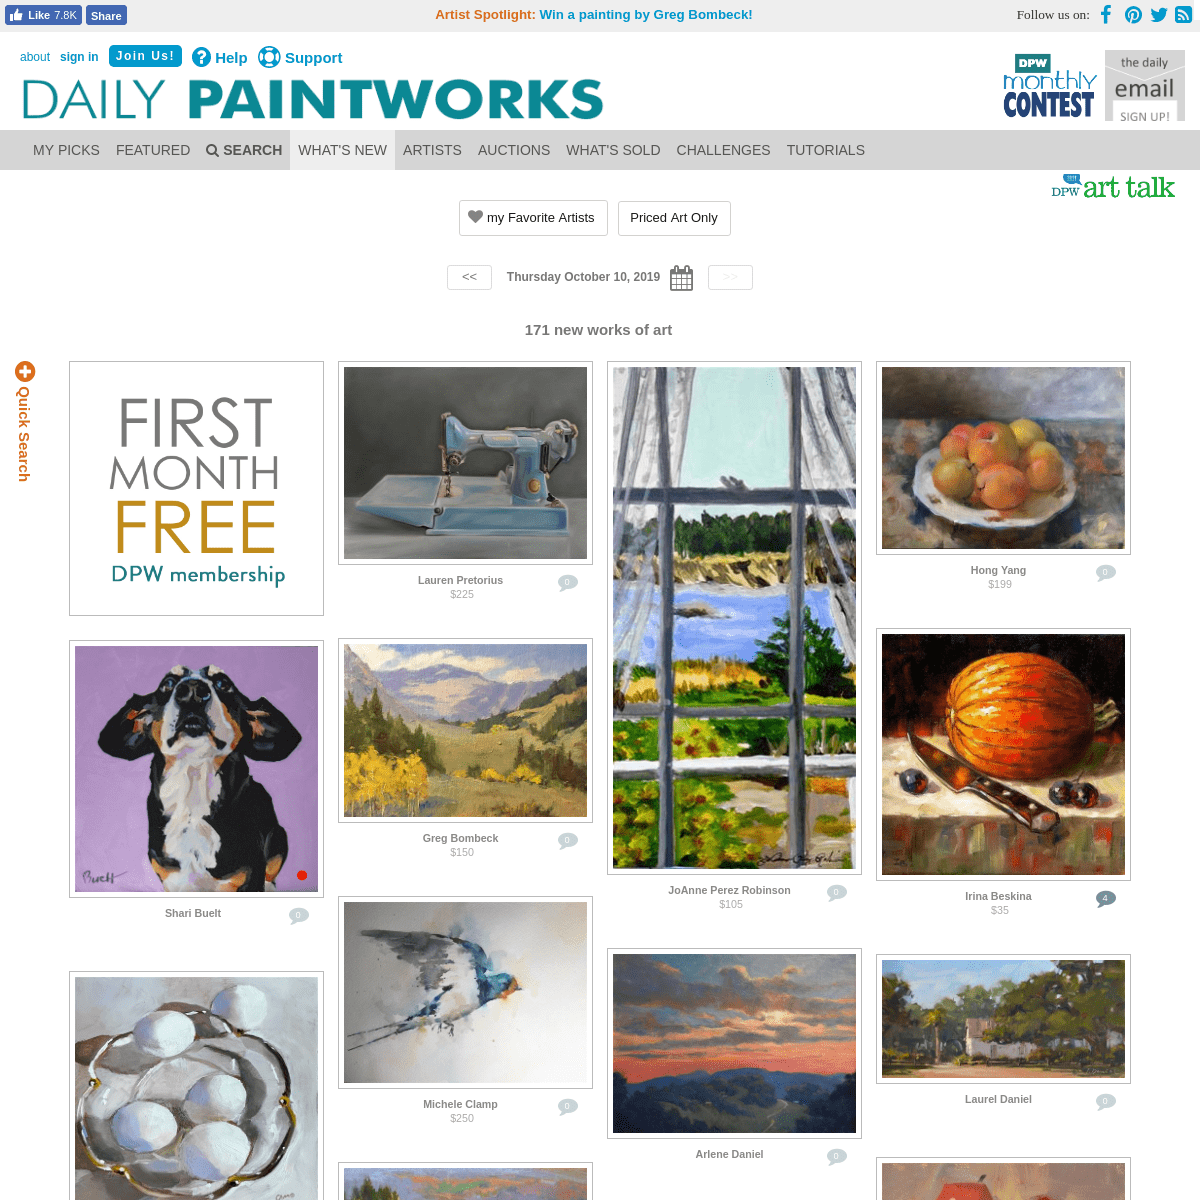 A complete backup of dailypaintworks.com